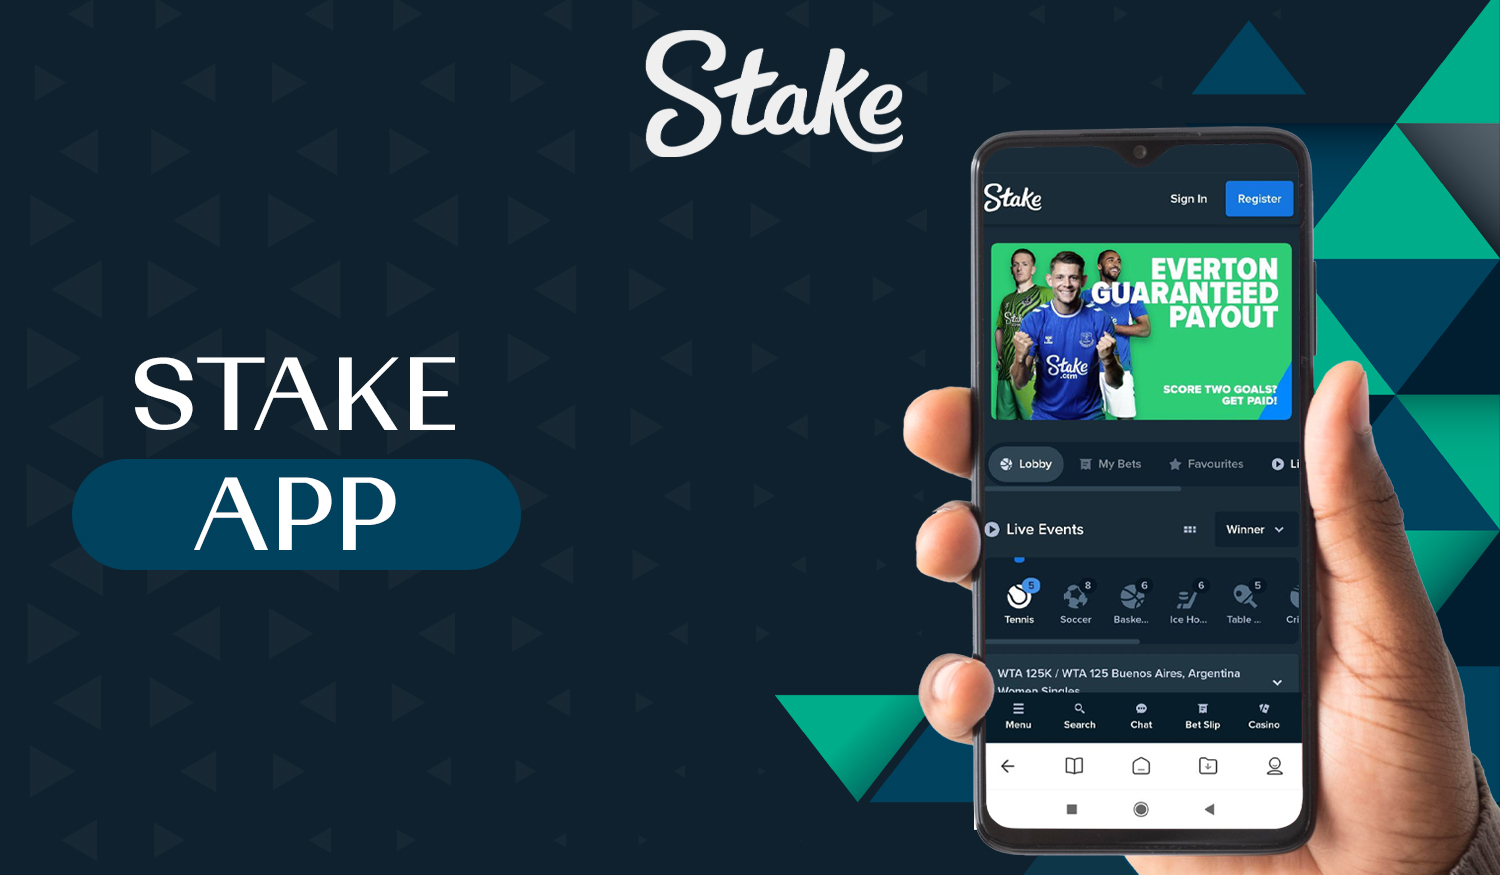 What games in the casino section are available to Indian users on the Stake app 